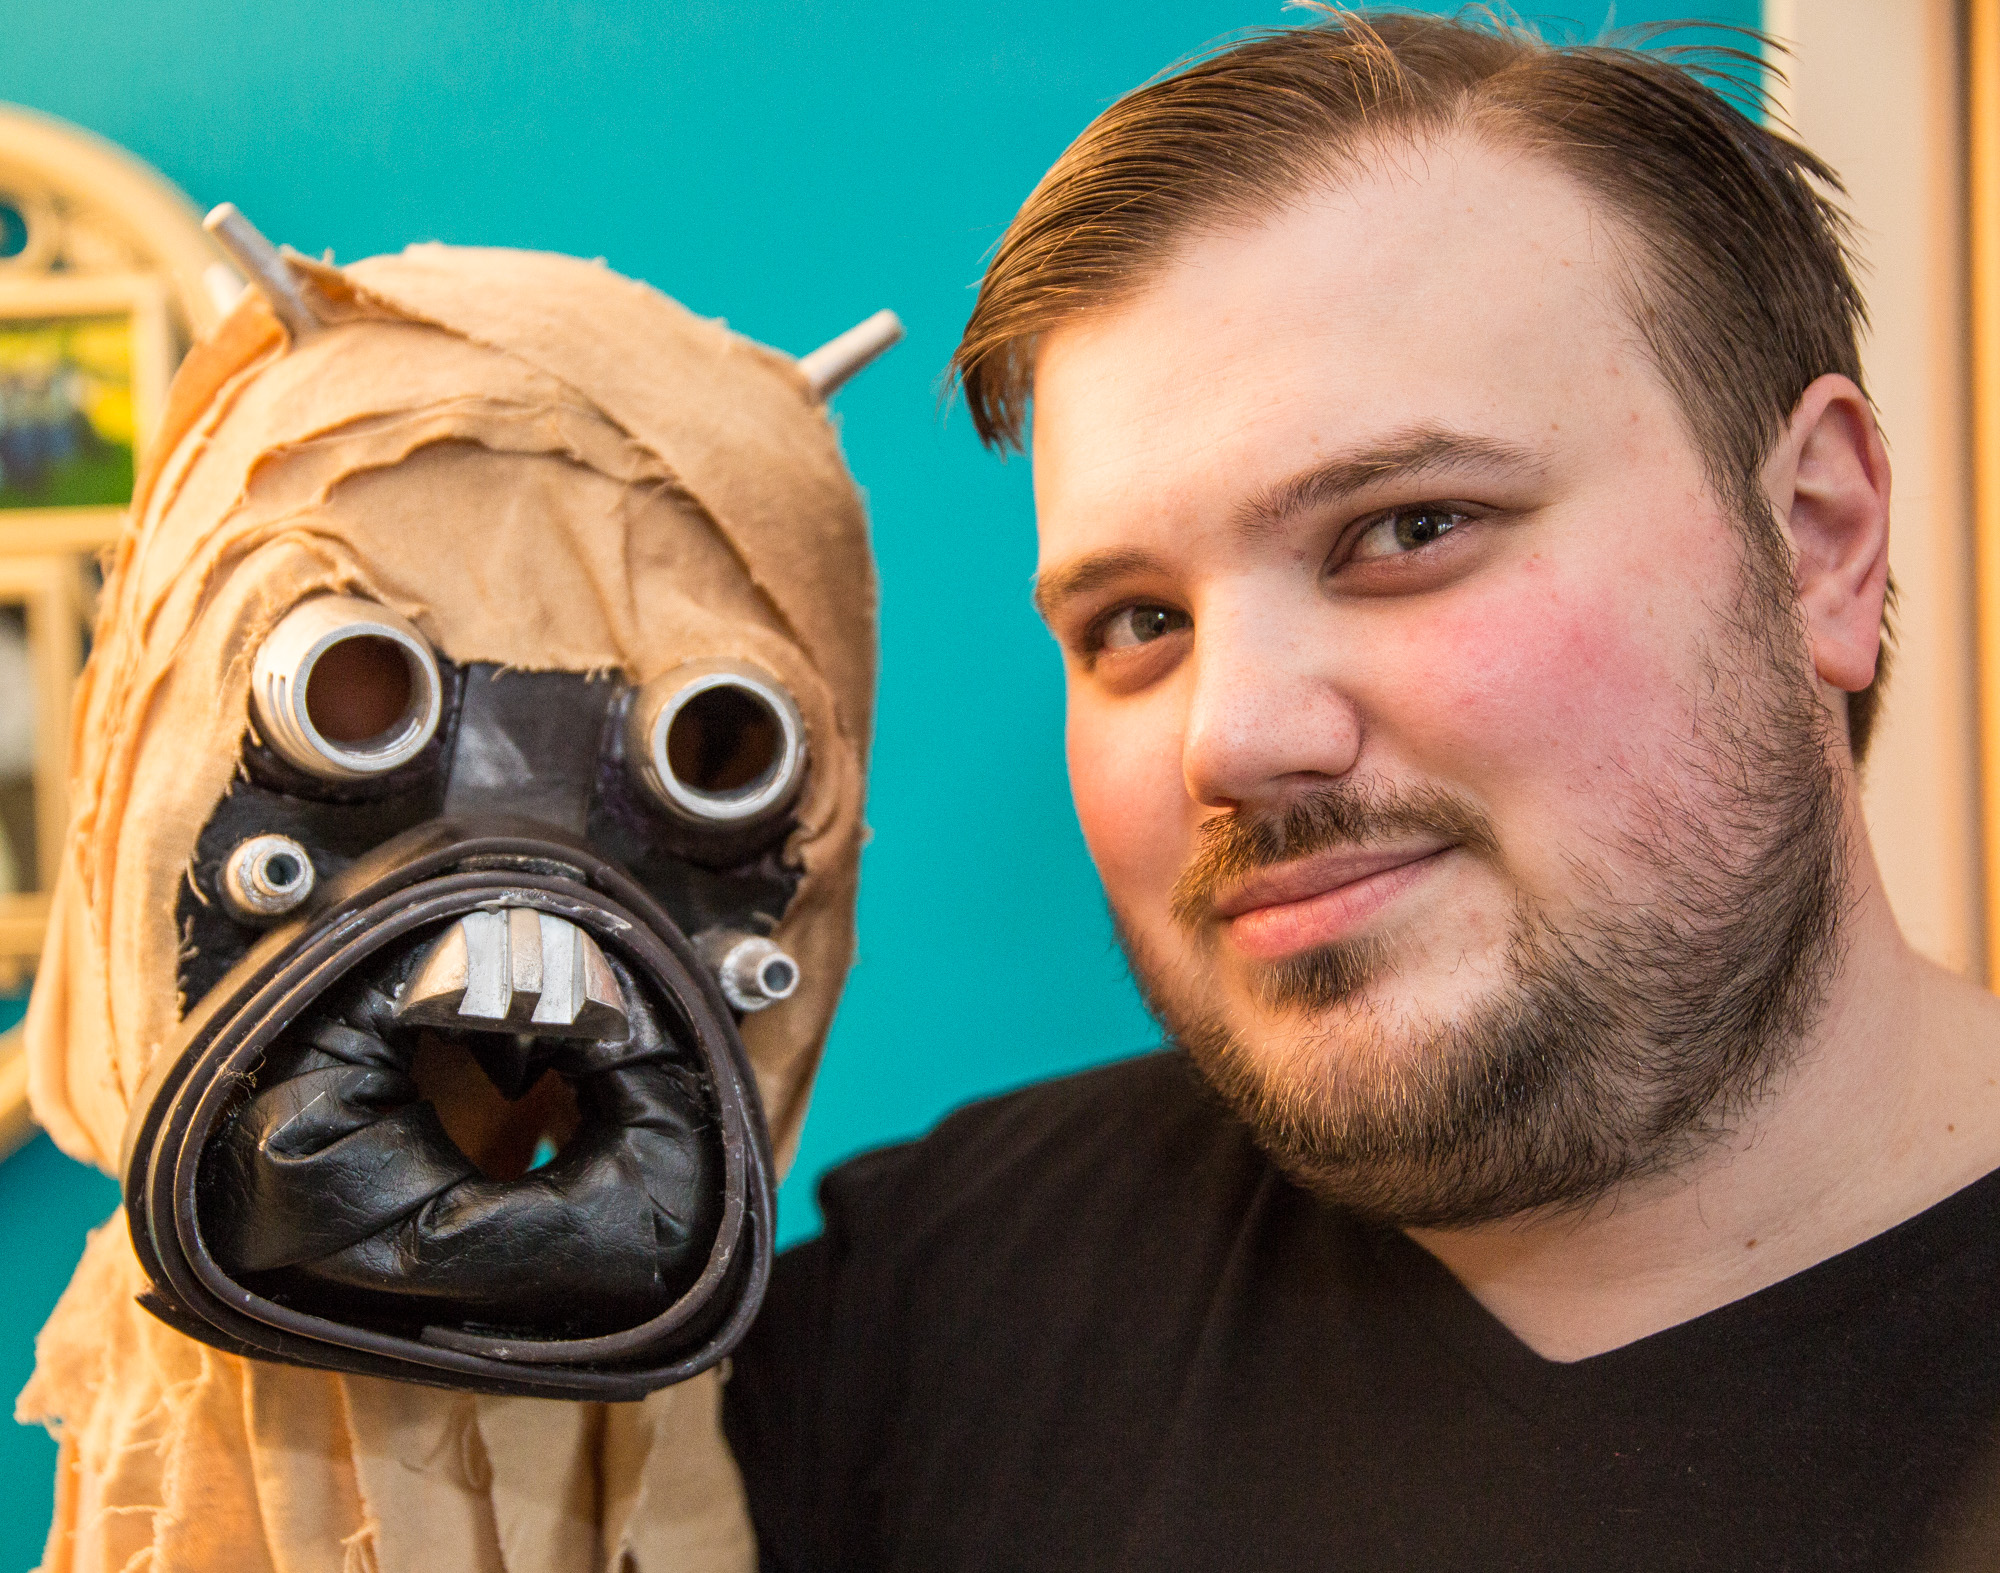 Waiter Robert serves up out of this world Star Wars costumes